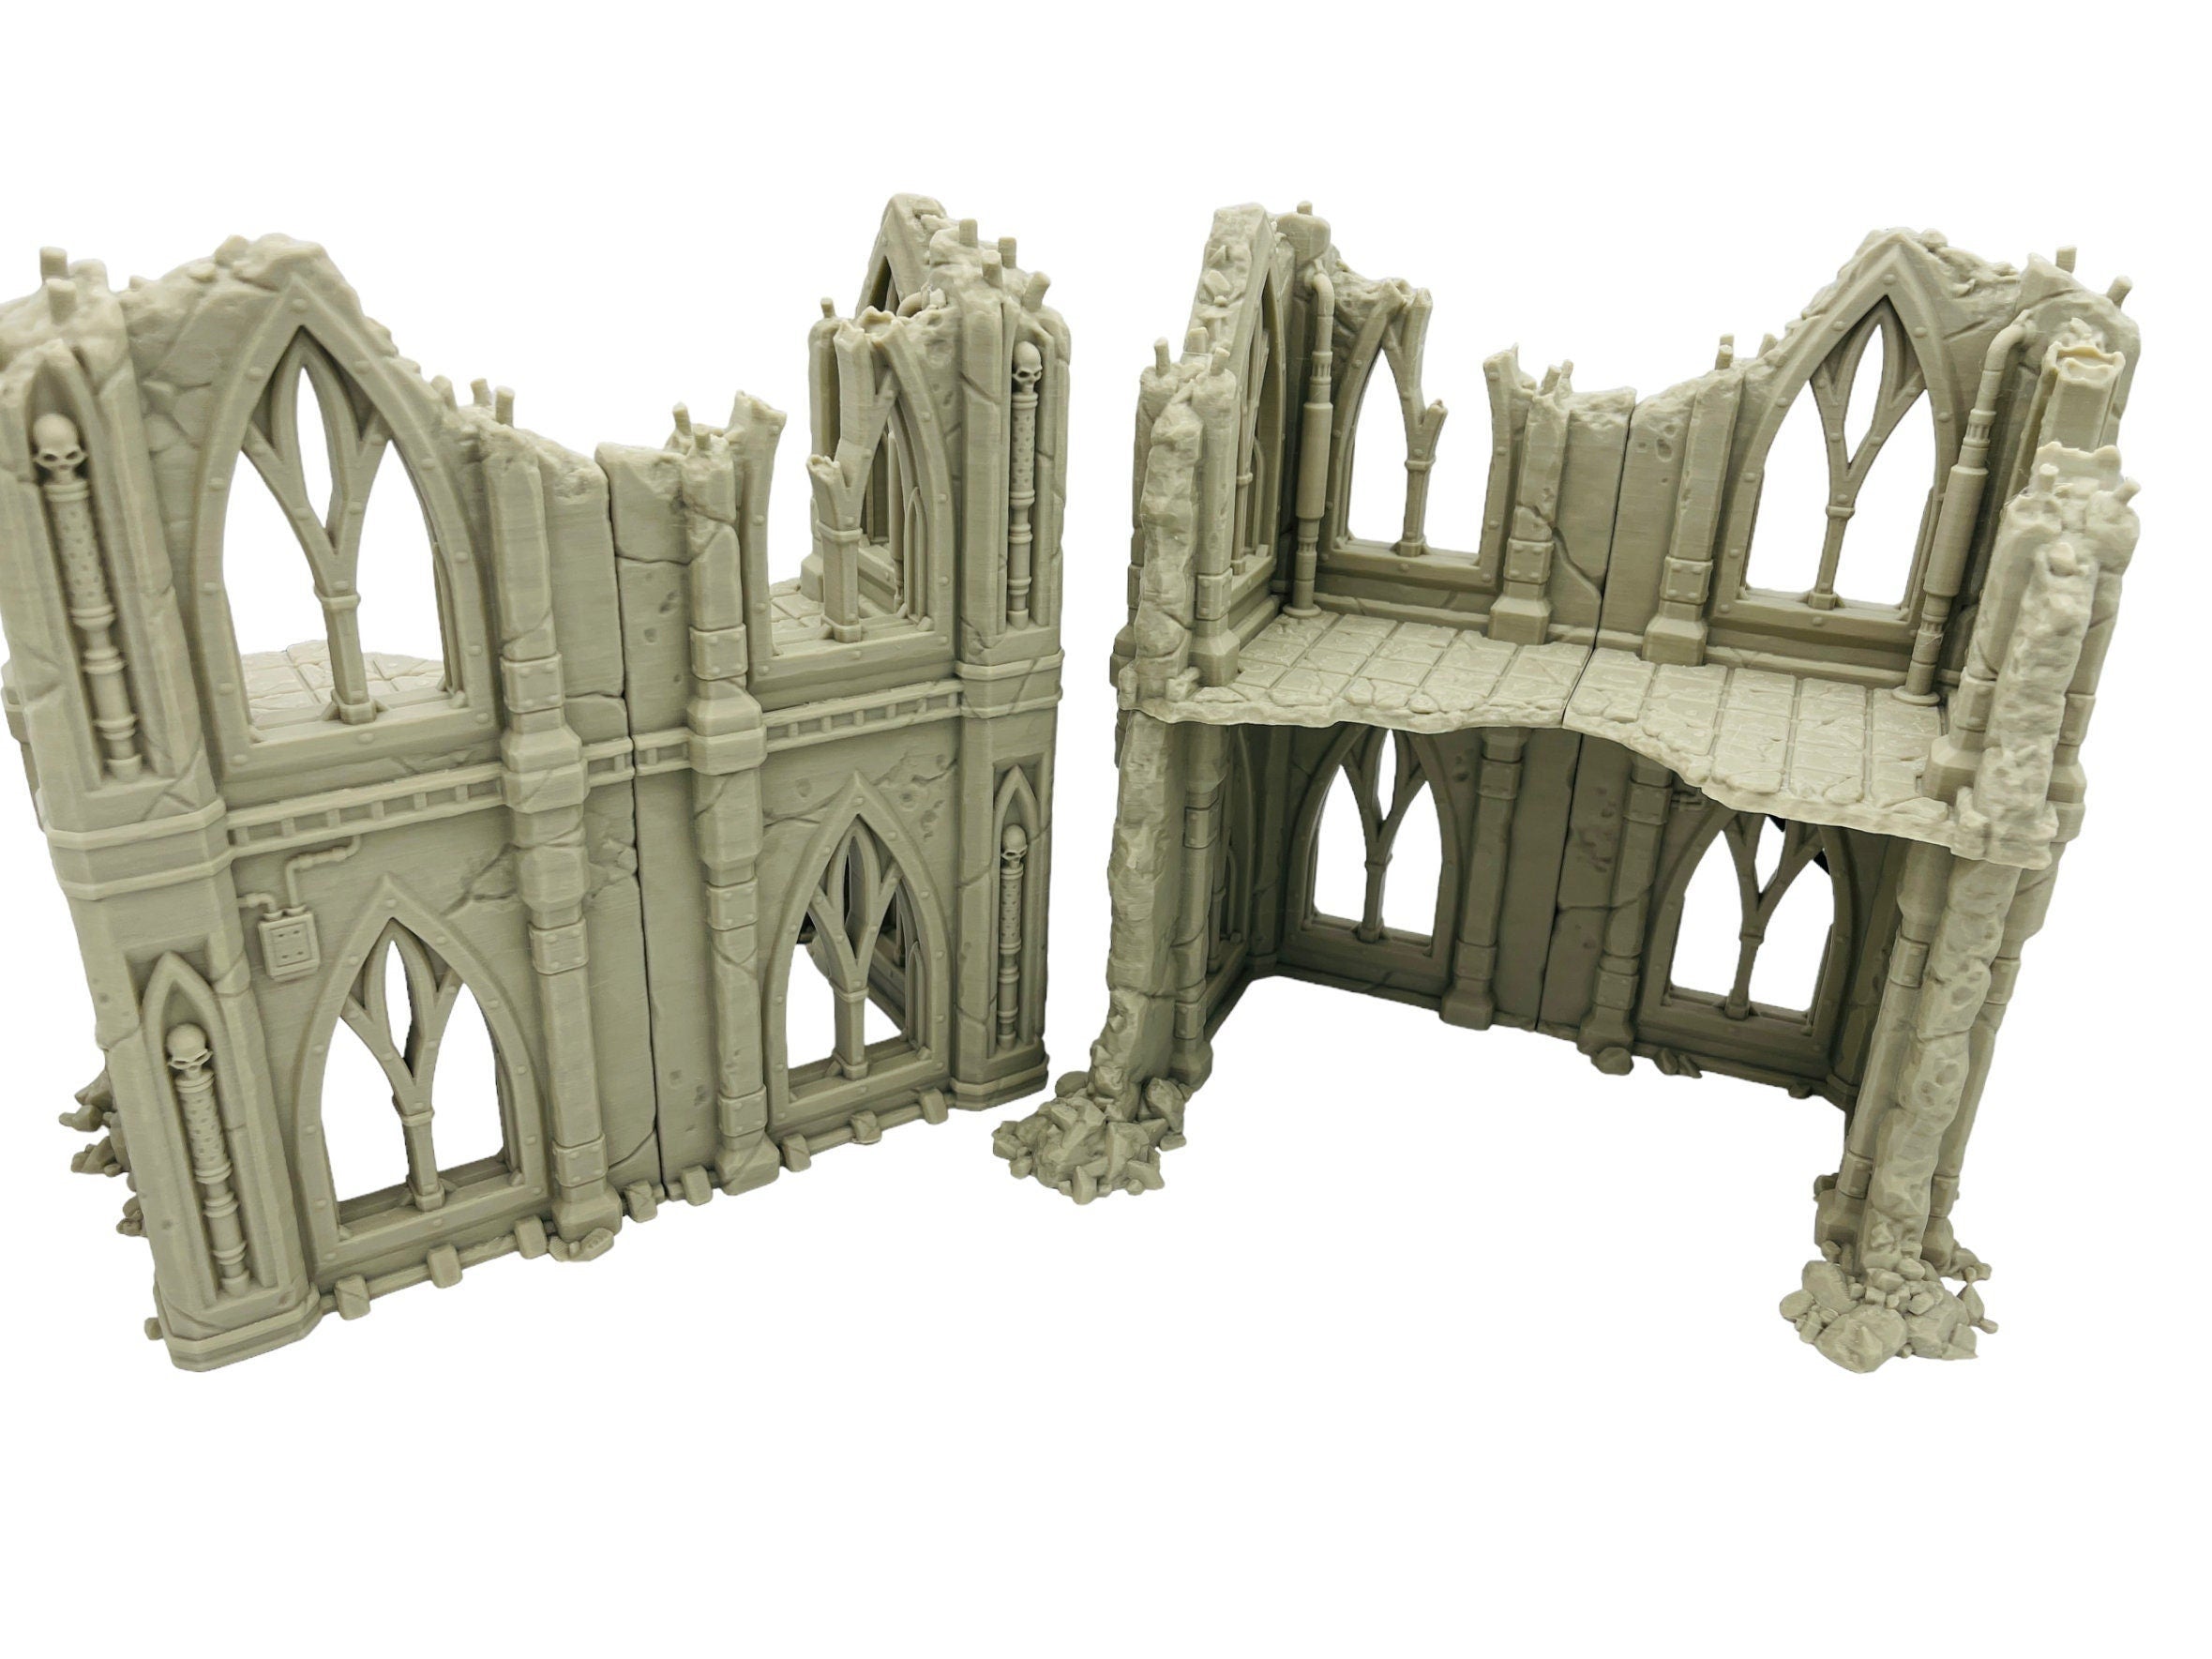 Ruined Structure 1 - Ruins of the Empire / Forbidden Prints / RPG and Wargame 3d Printed Tabletop Terrain / Licensed Printer